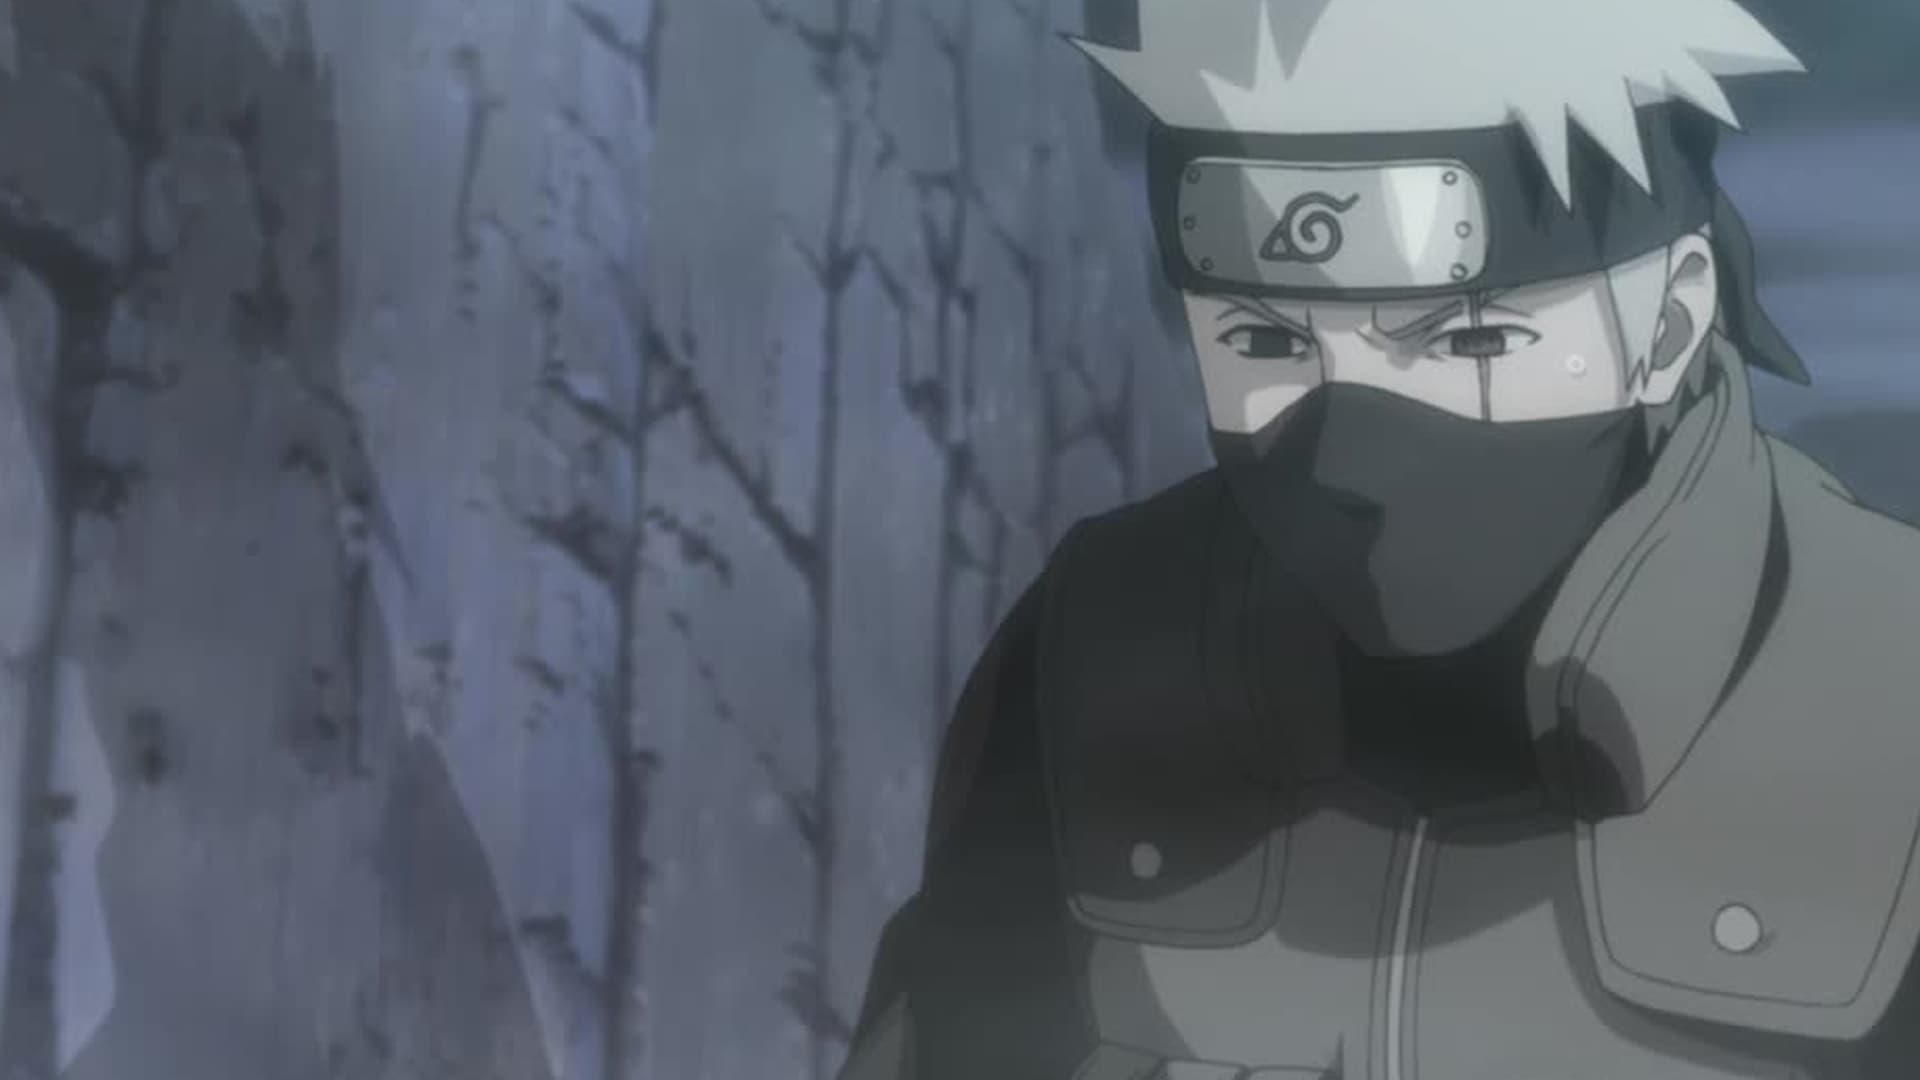 Watch The Last - Naruto the Movie (Dubbed)